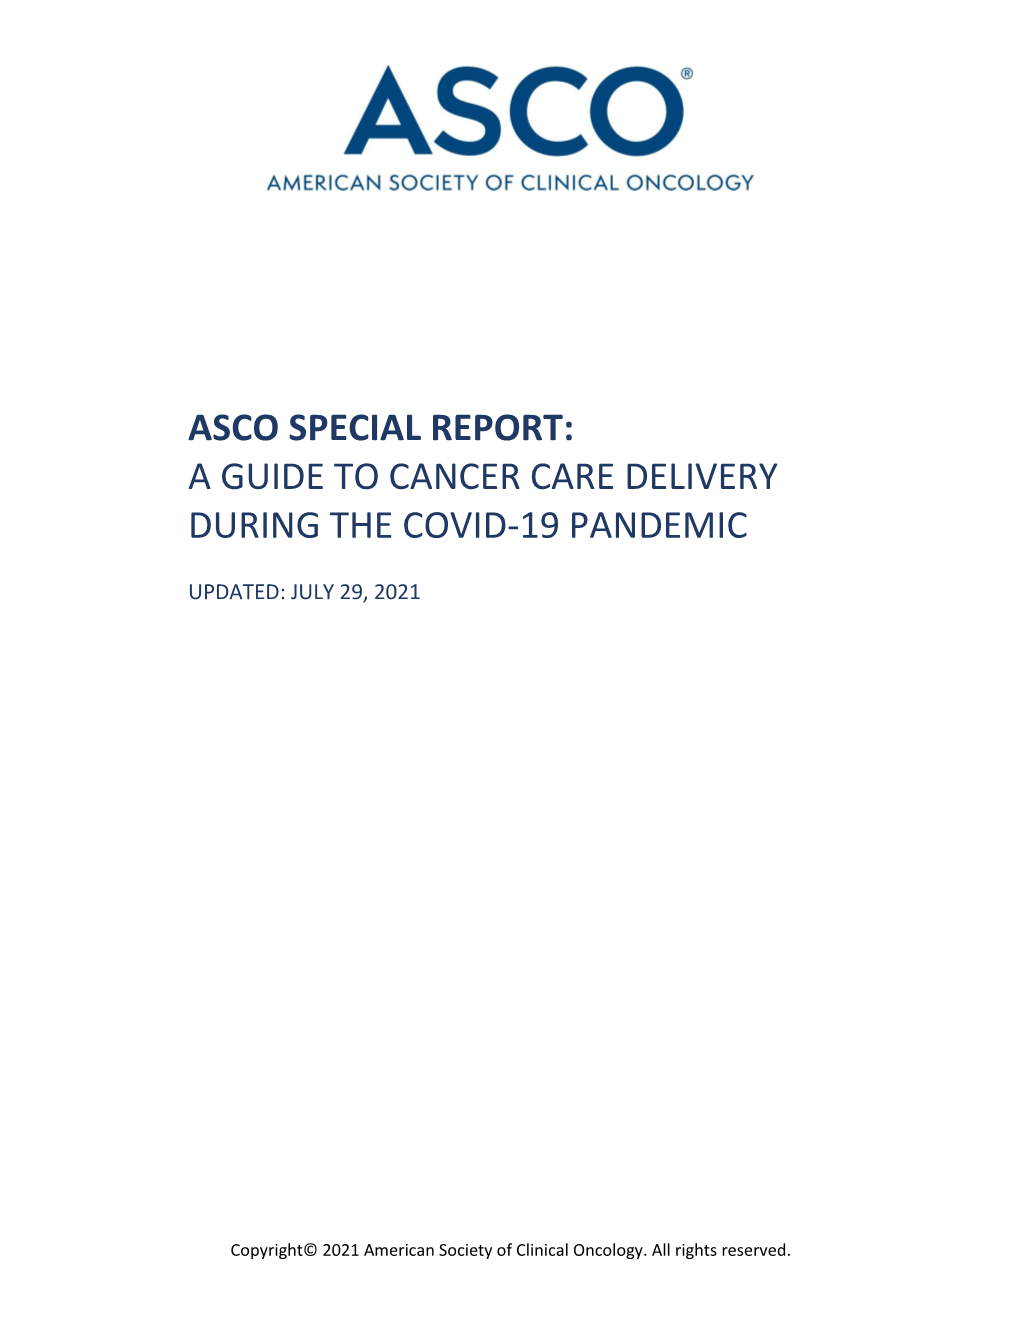 Asco Special Report: a Guide to Cancer Care Delivery During the Covid-19 Pandemic